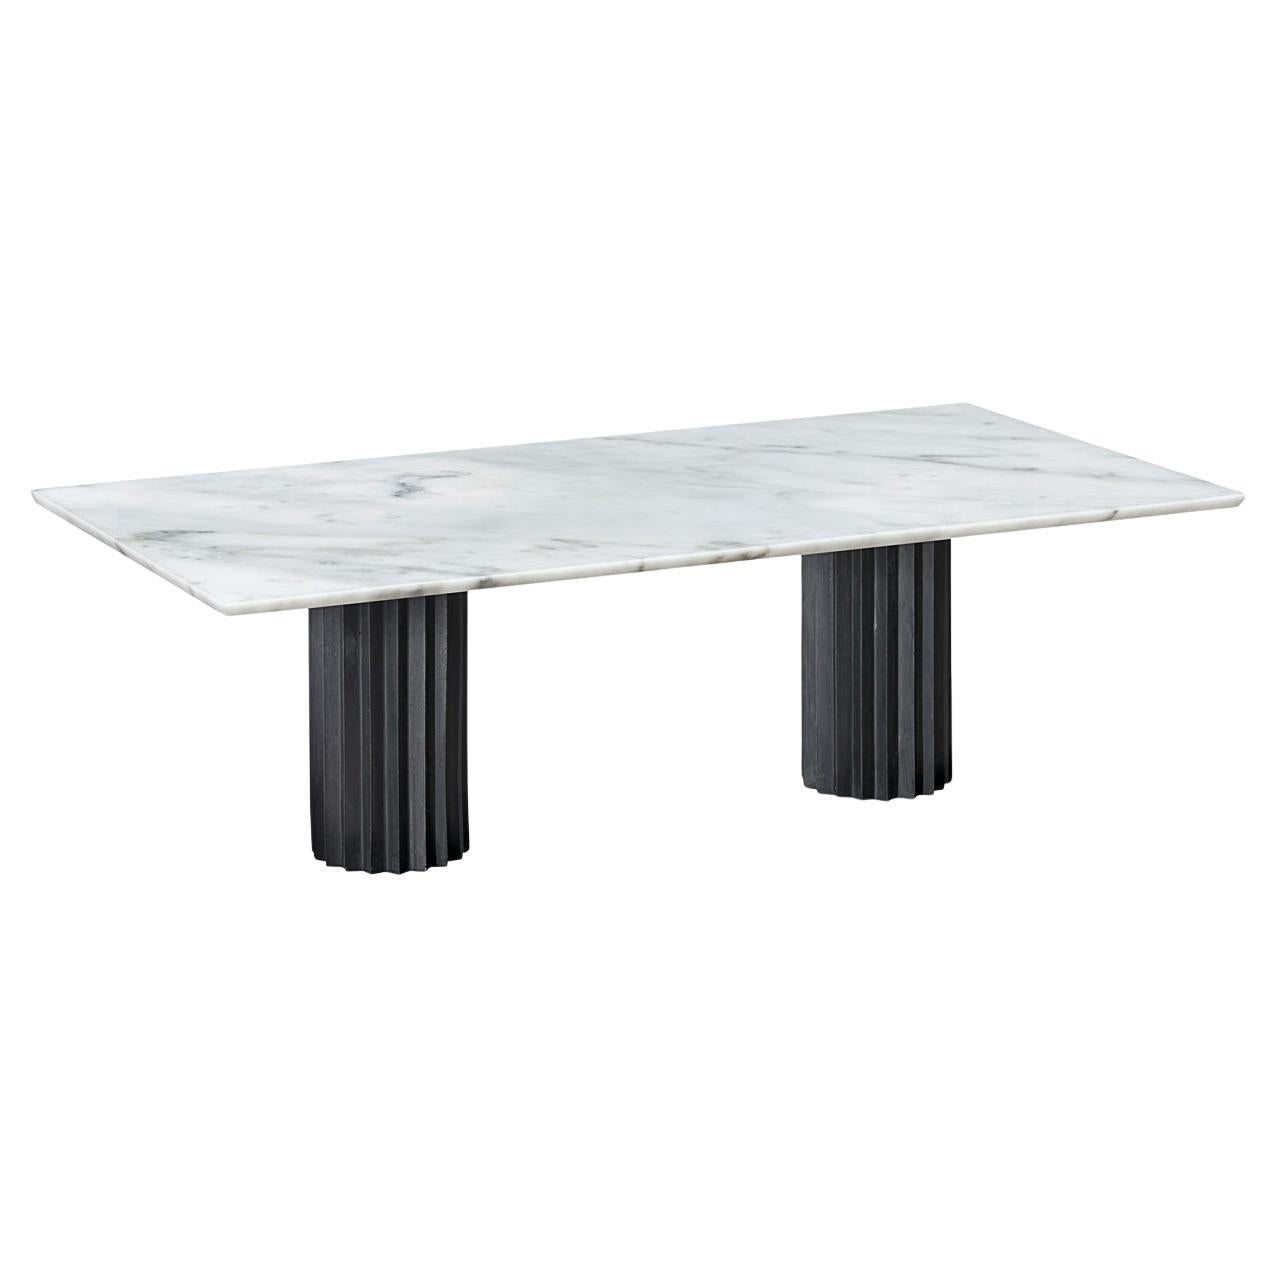 Doris White Carrara Marble Rectangular Dining Table by Fred and Juul For Sale